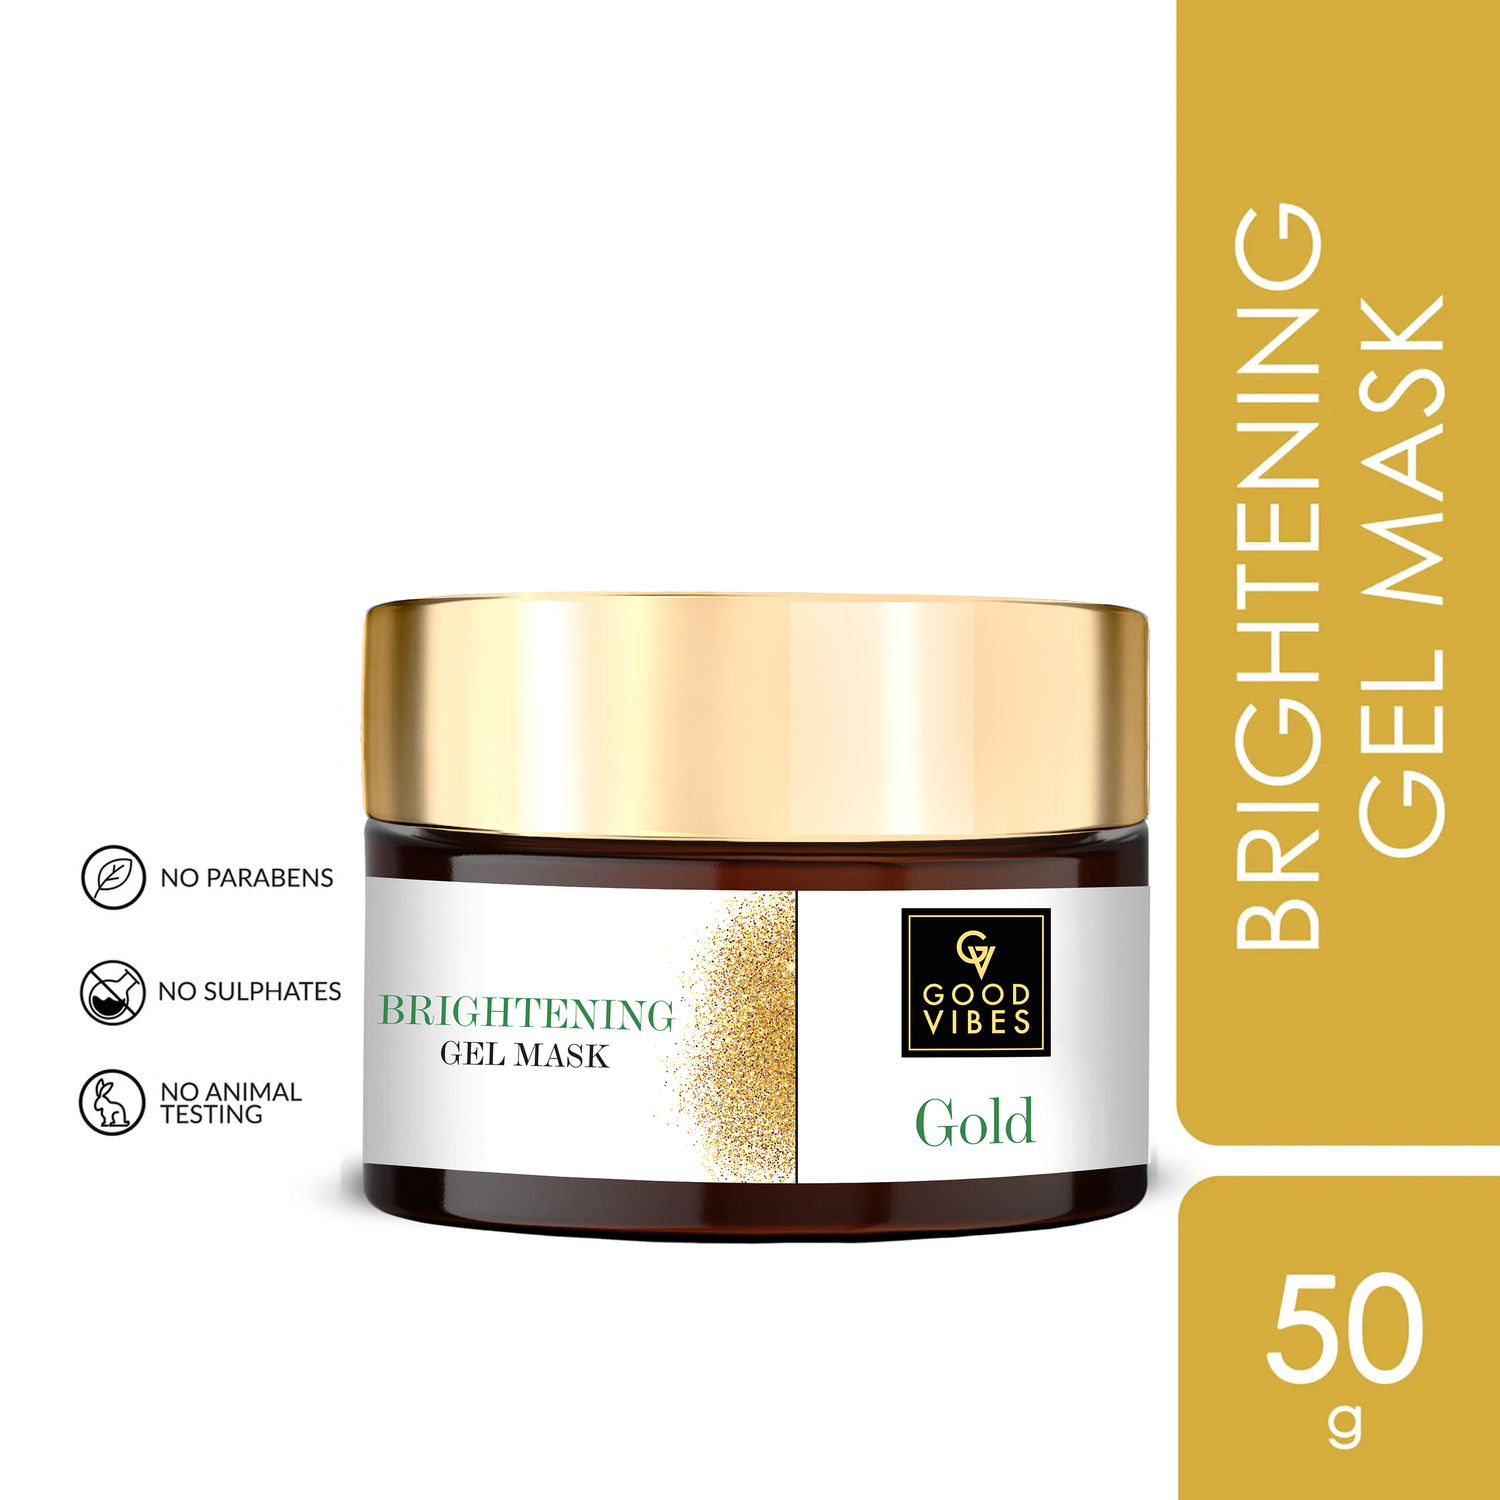 Buy Good Vibes Gold Brightening Gel Mask | Anti-Ageing, Nourishing | No Parabens, No Sulphates, No Mineral Oil, No Animal Testing (50g) - Purplle